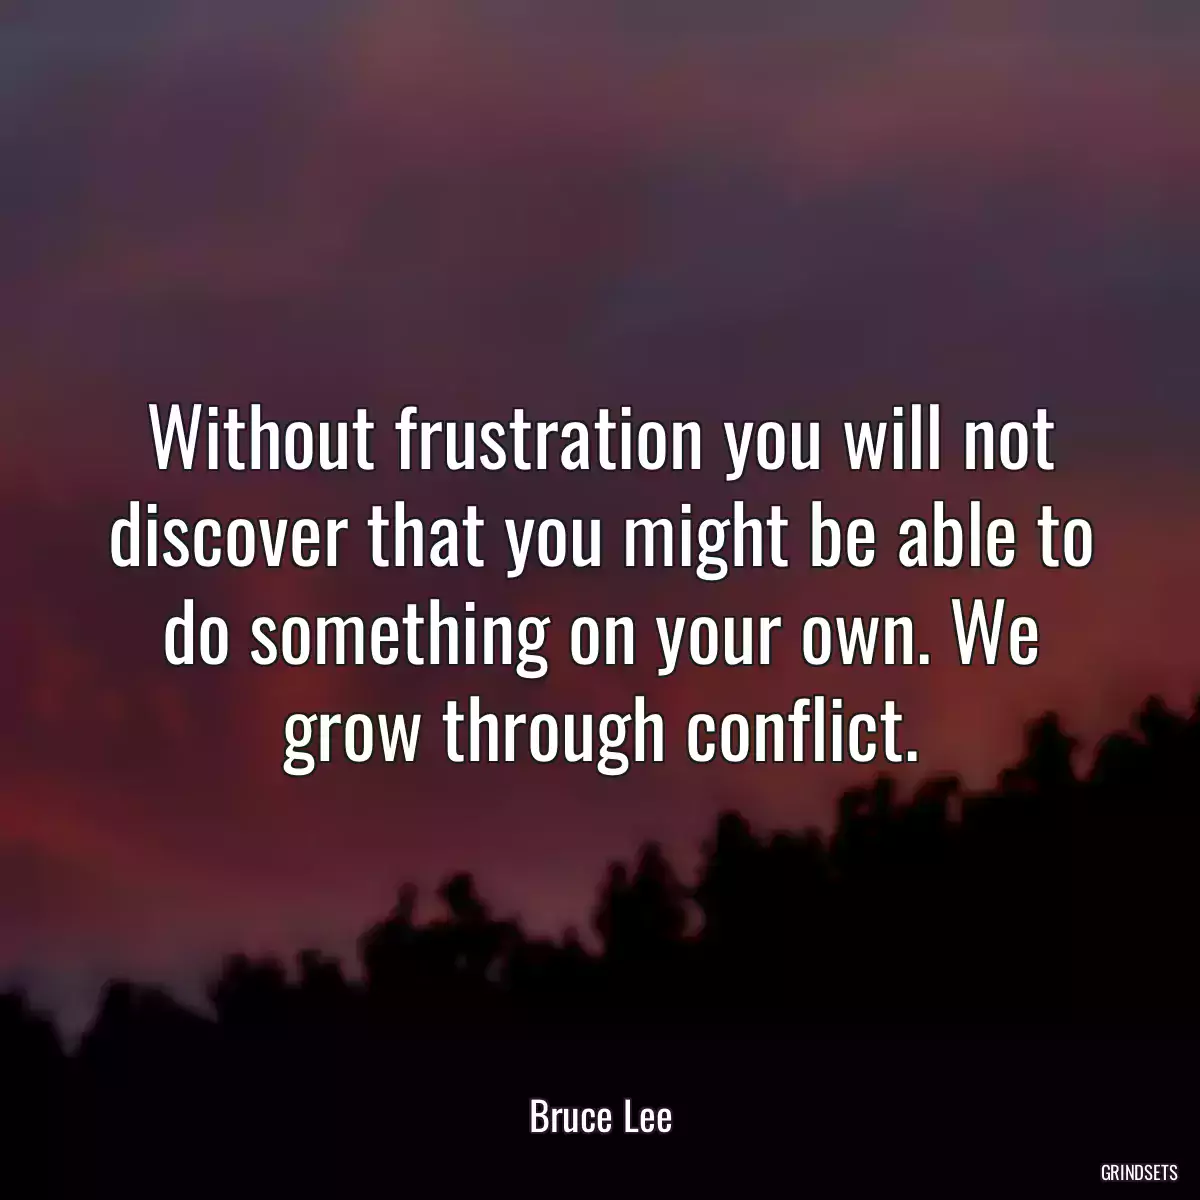 Without frustration you will not discover that you might be able to do something on your own. We grow through conflict.